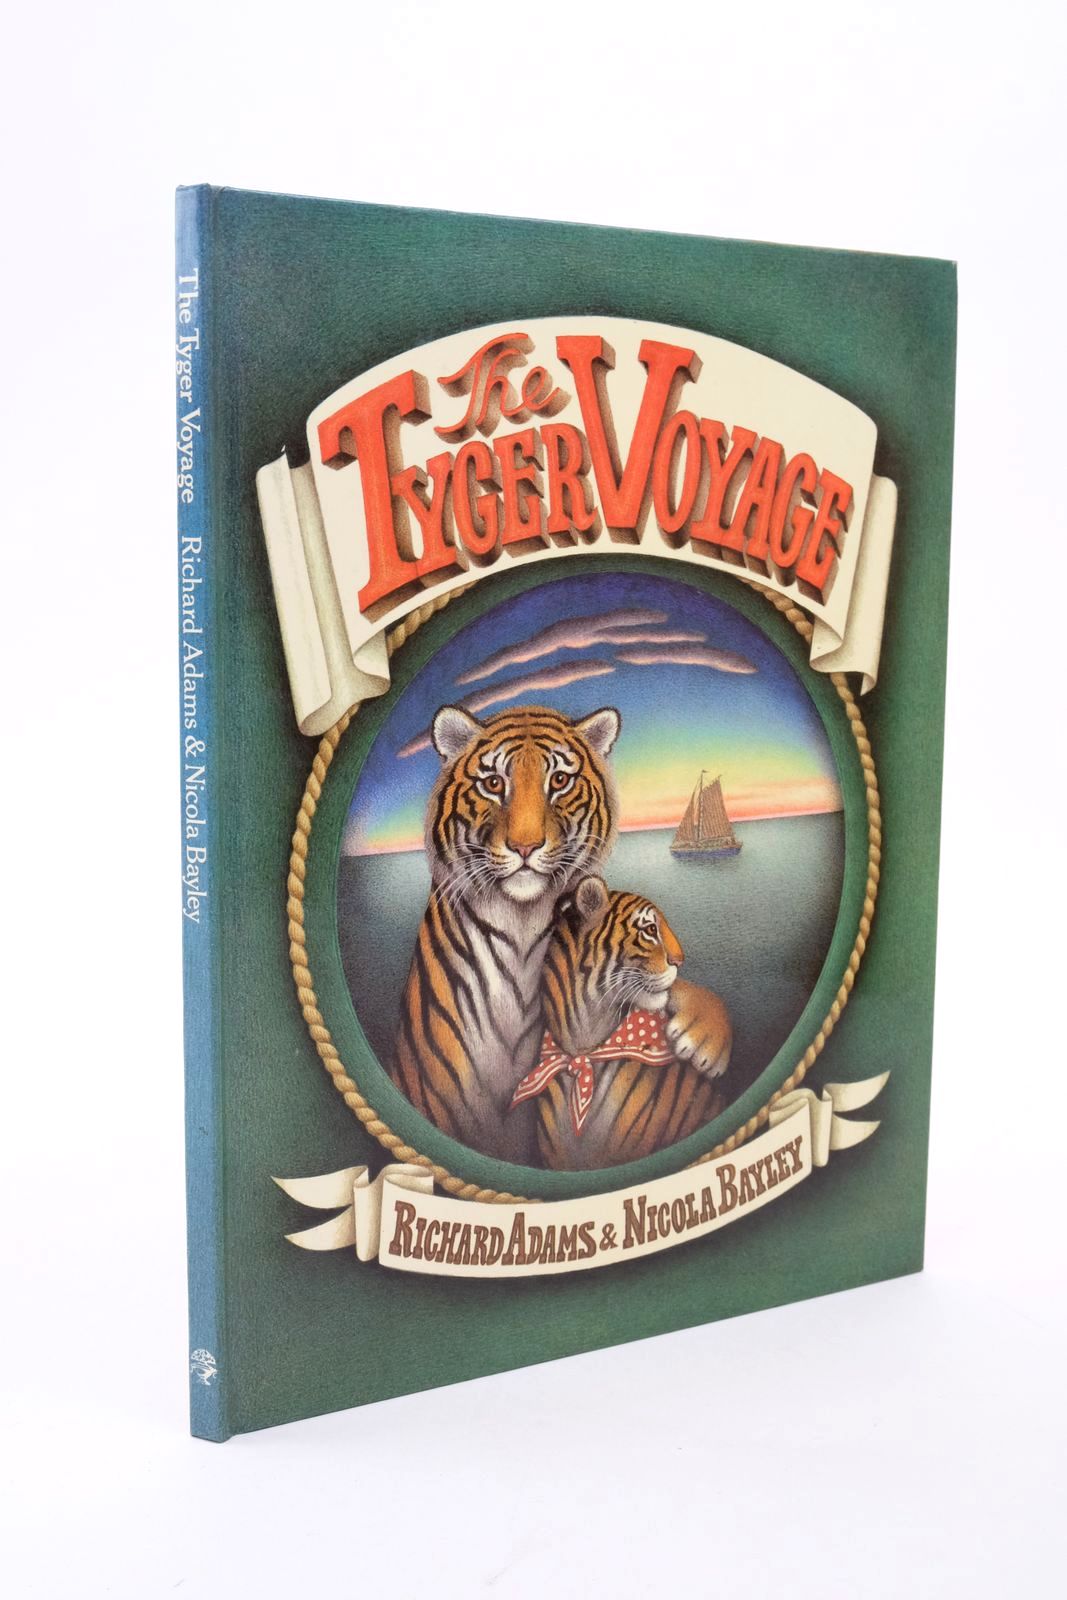 Photo of THE TYGER VOYAGE- Stock Number: 1322712